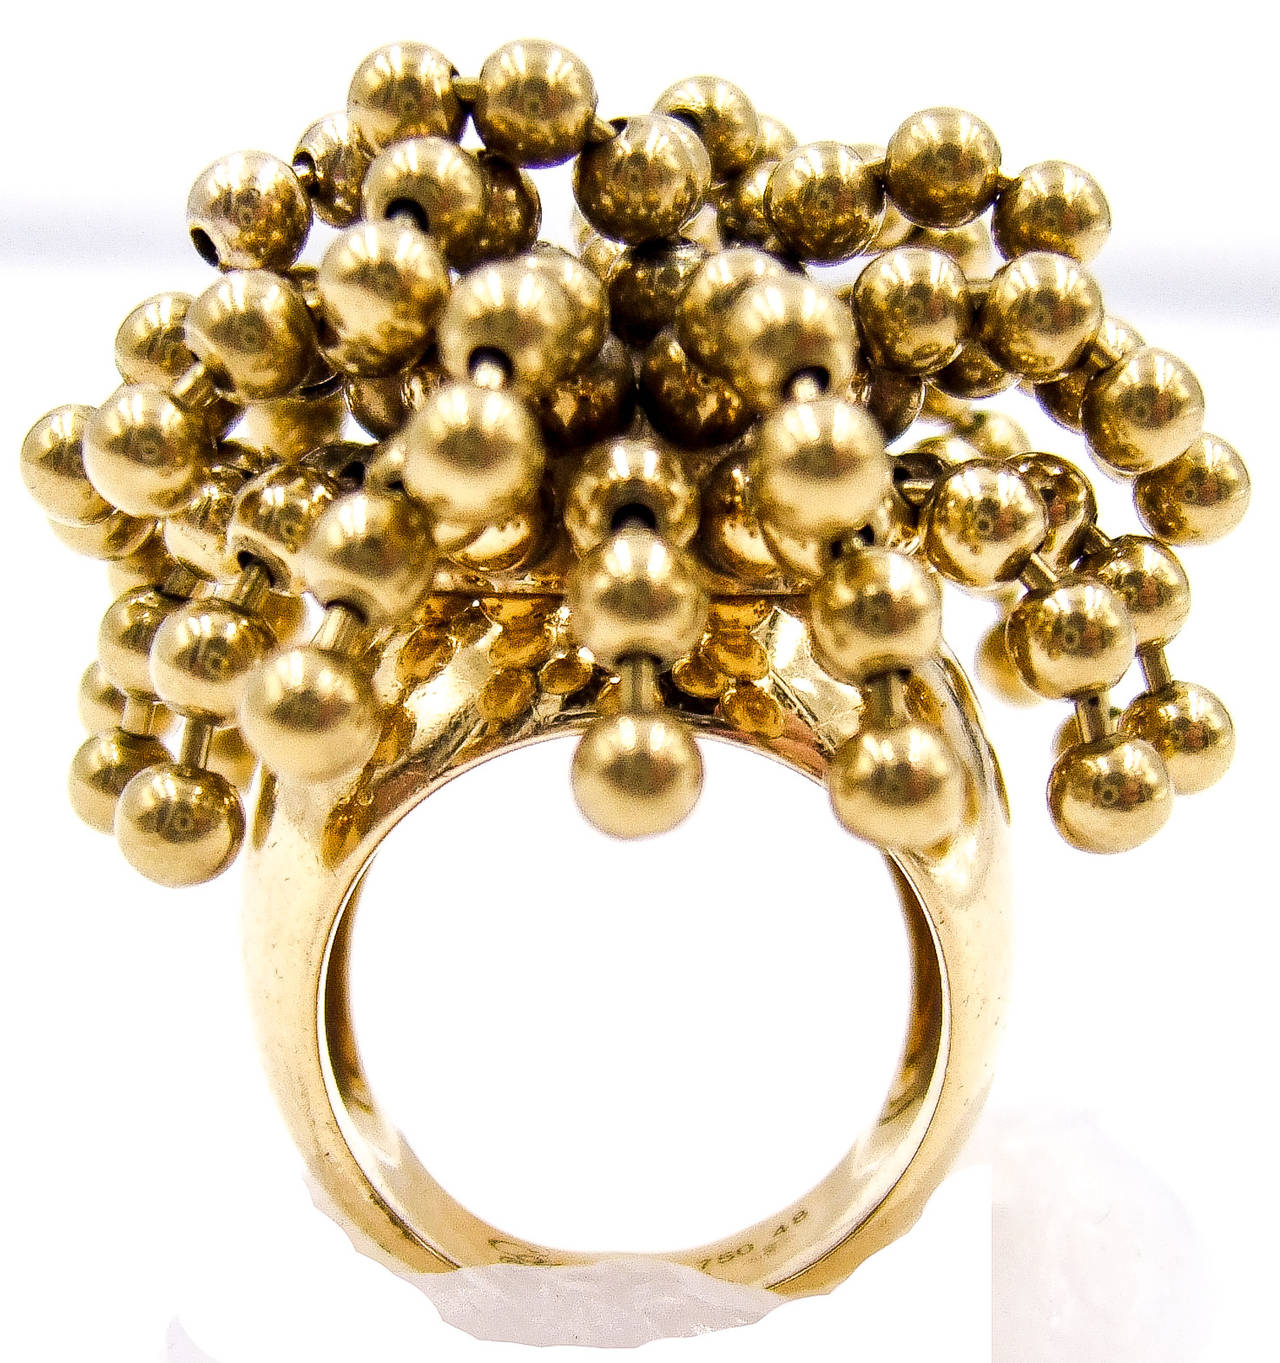 A delightfully amusing ring, with the quality and elegance so inherent in Cartier pieces. The gold balls positioned on golden strands do indeed flip around and move like hanks of hair, so the name 